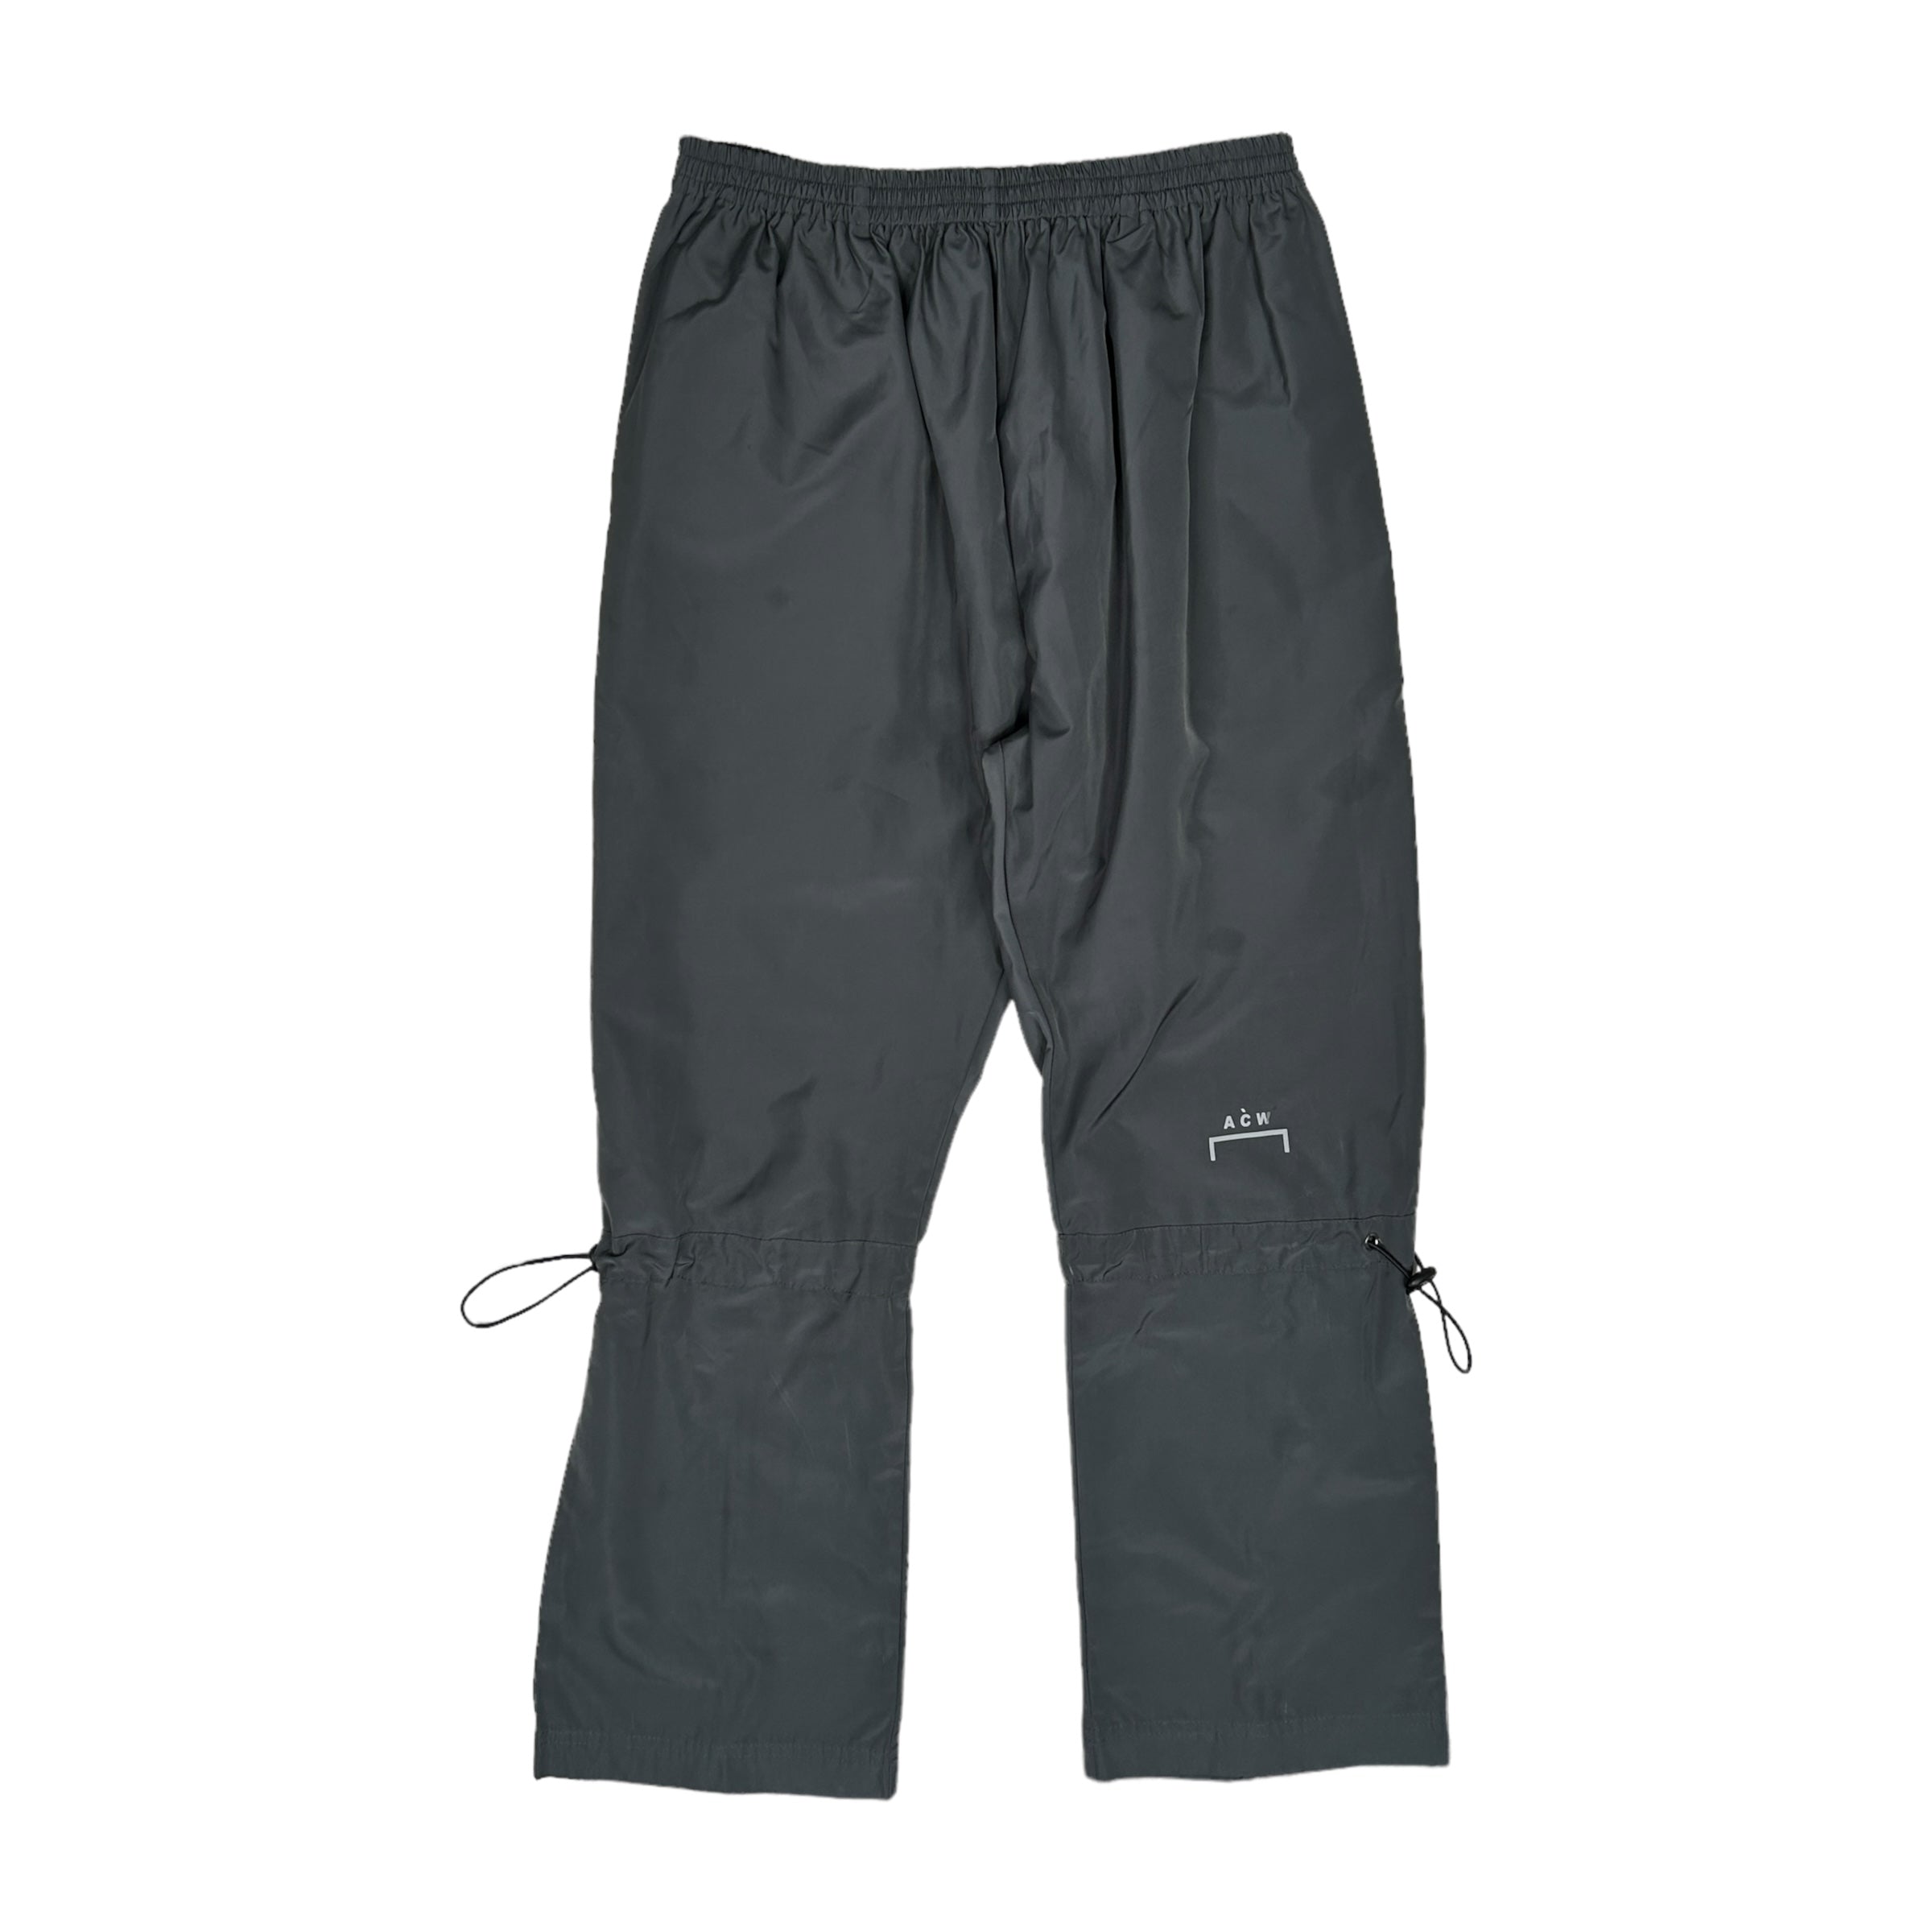 A COLD WALL* LIMITED GREY CINCH NYLON TRACK PANTS